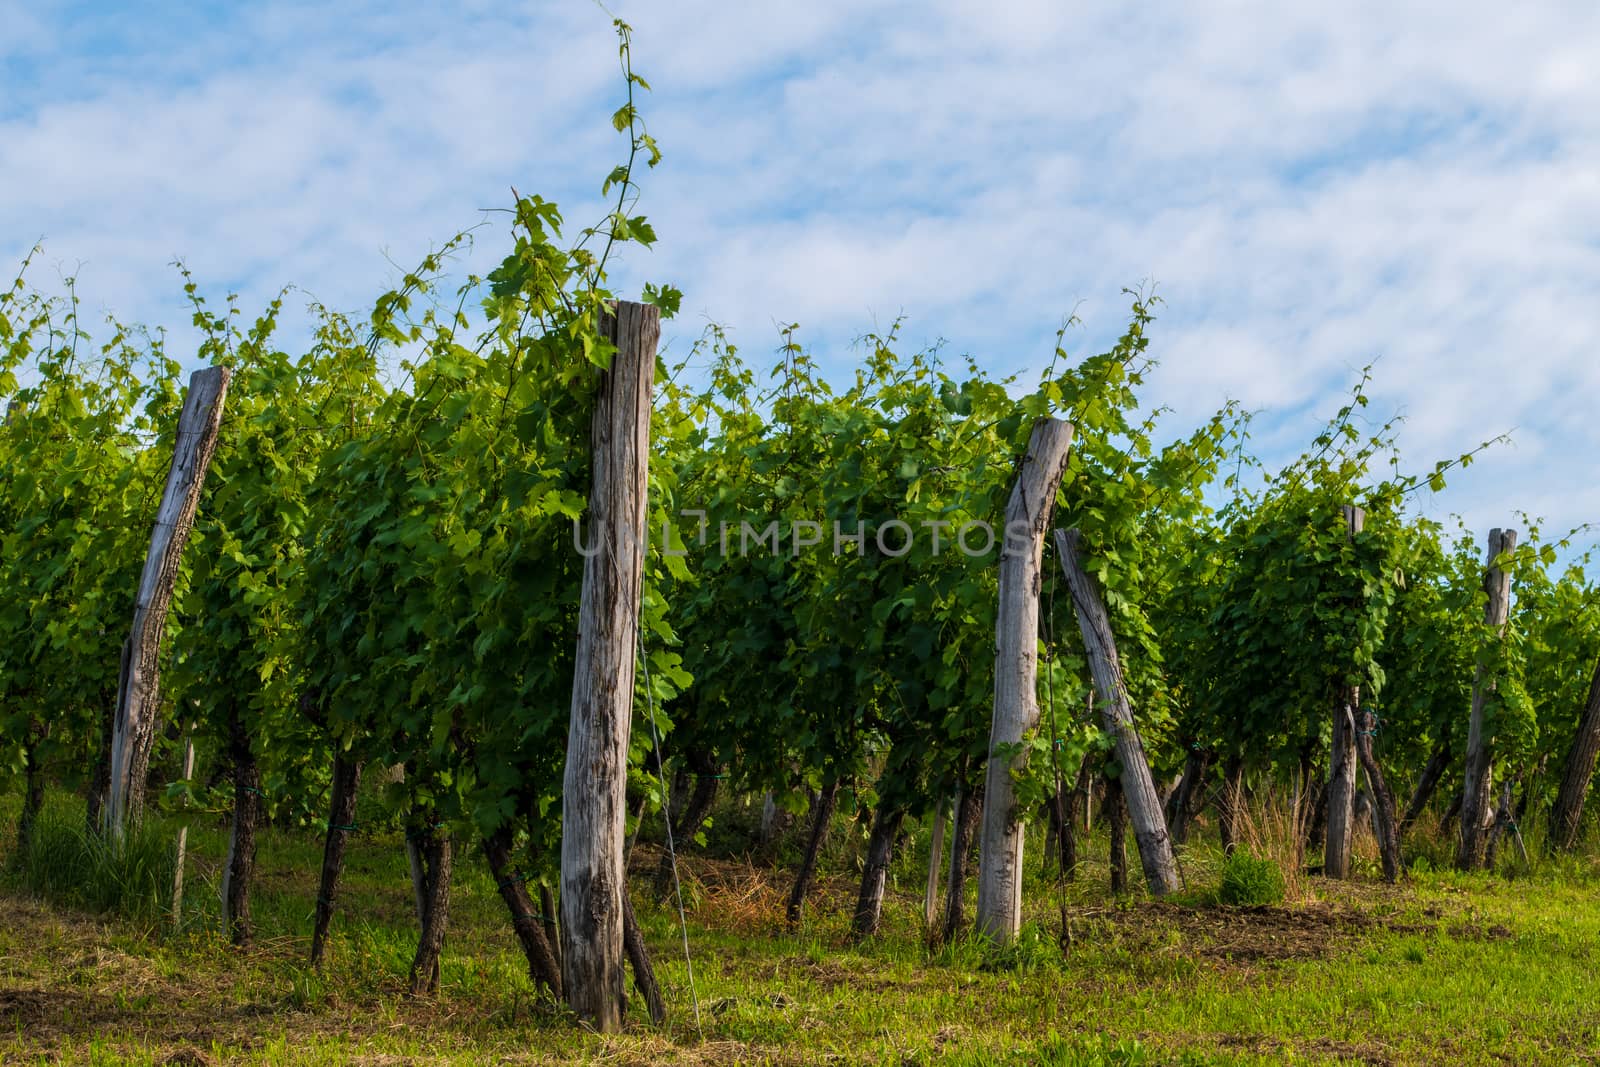 Vineyard in summer morning, grape vines planted in rows, Europe by asafaric